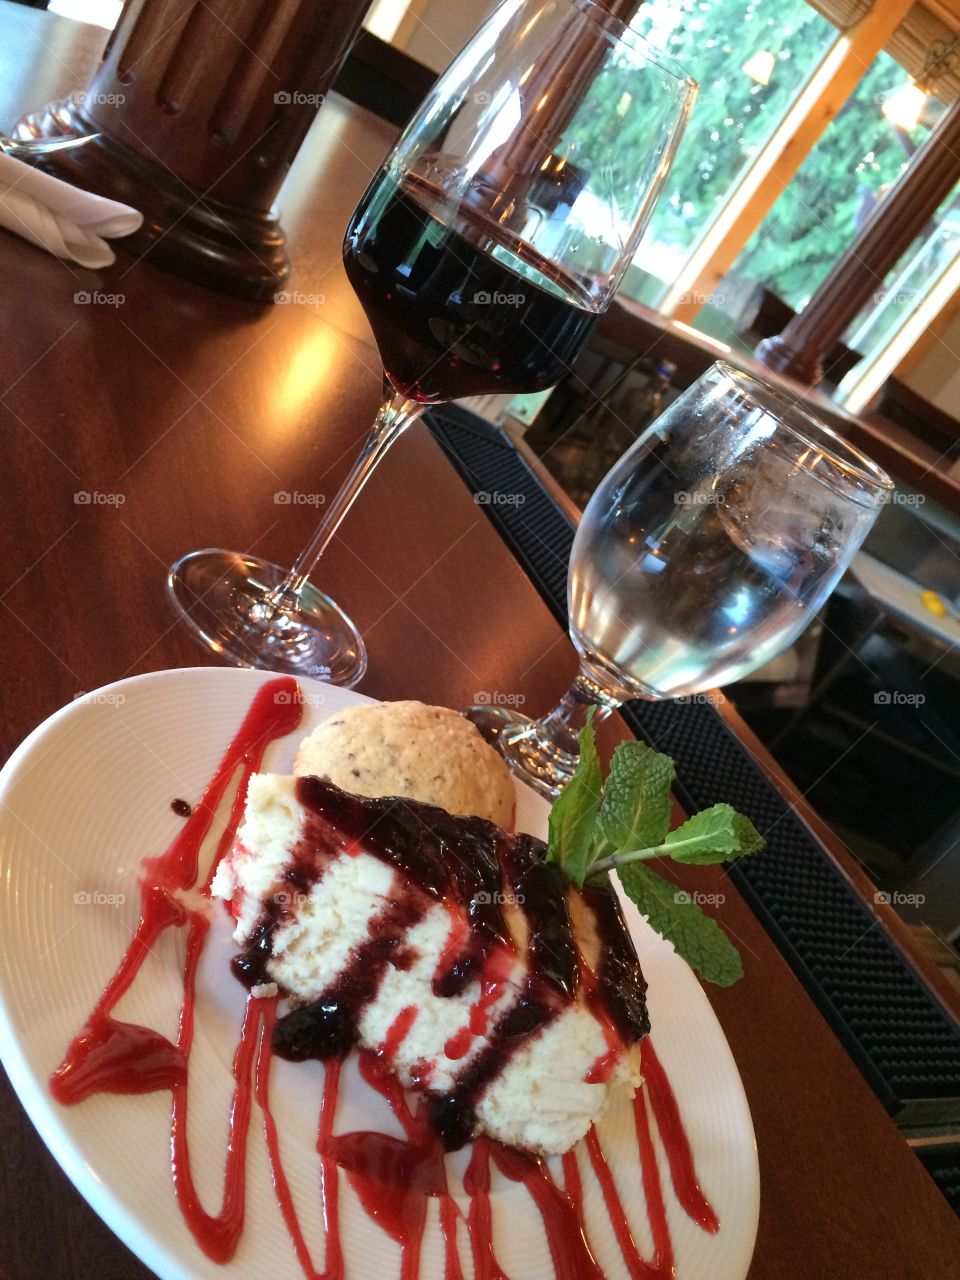 Raspberry drizzled New York style cheesecake with a glass of Merlot. Koko's restaurant on Alderbrook golf course.